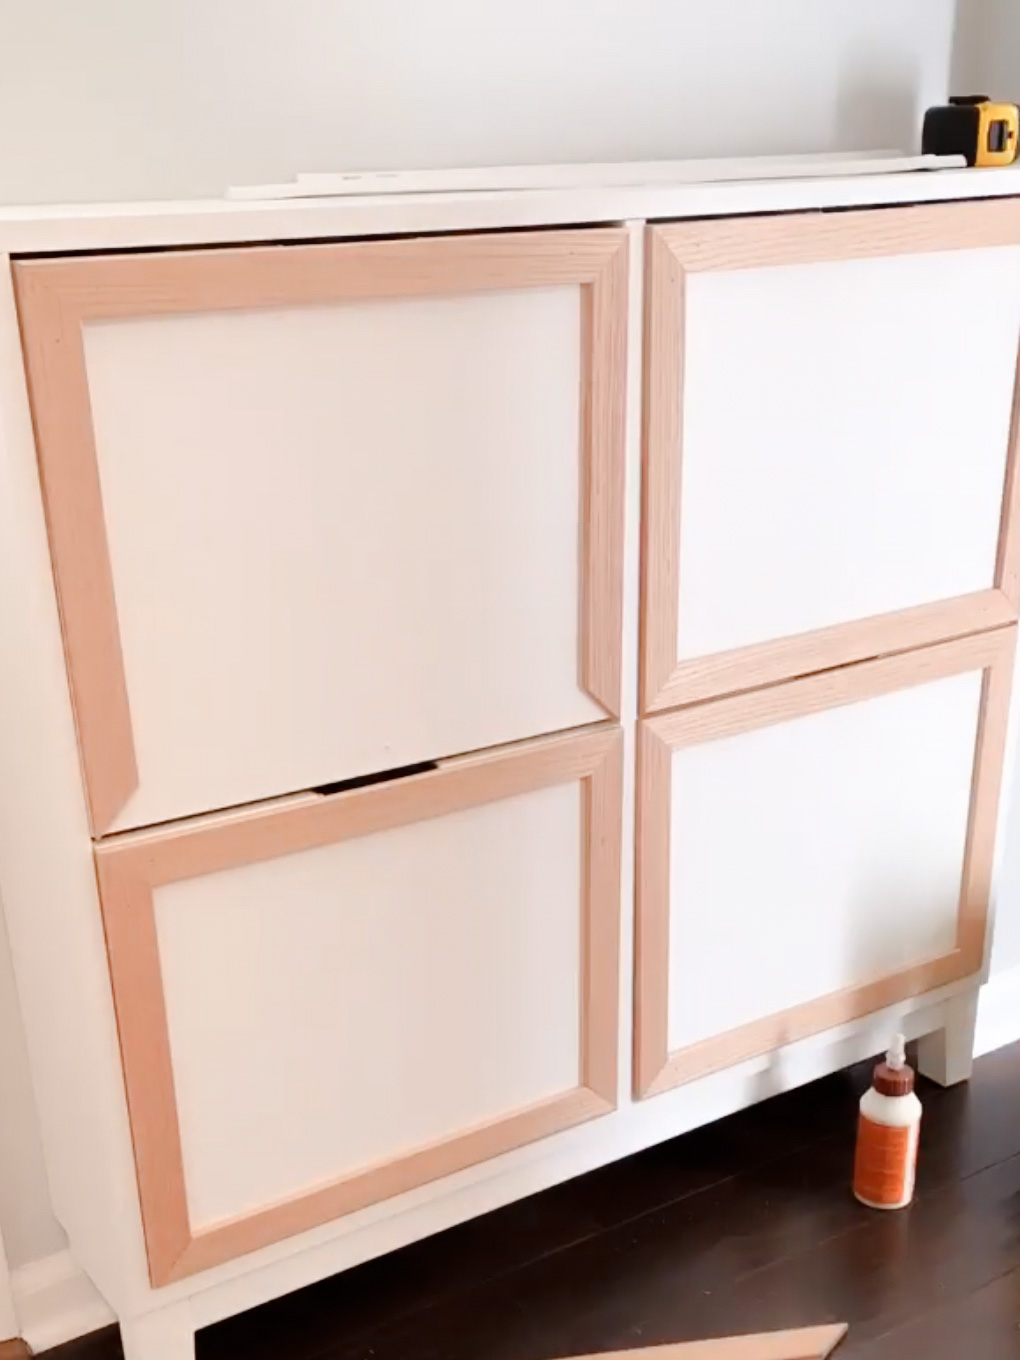 Shoe cabinet with edges of the drawers framed out.